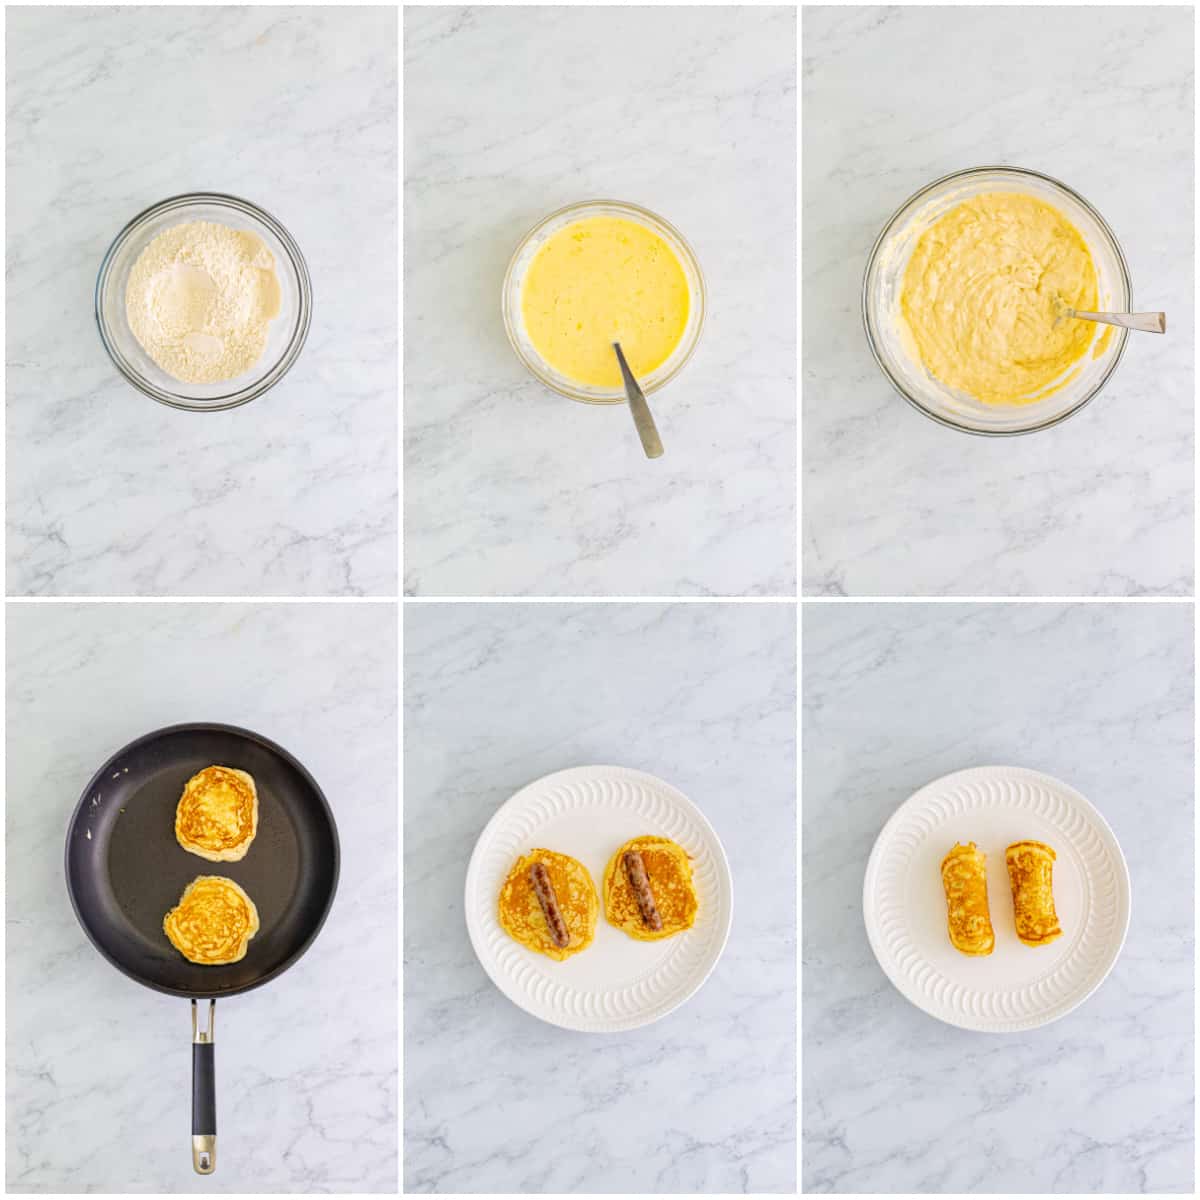 Step by step photos on how to make Breakfast Pigs in a Blanket.